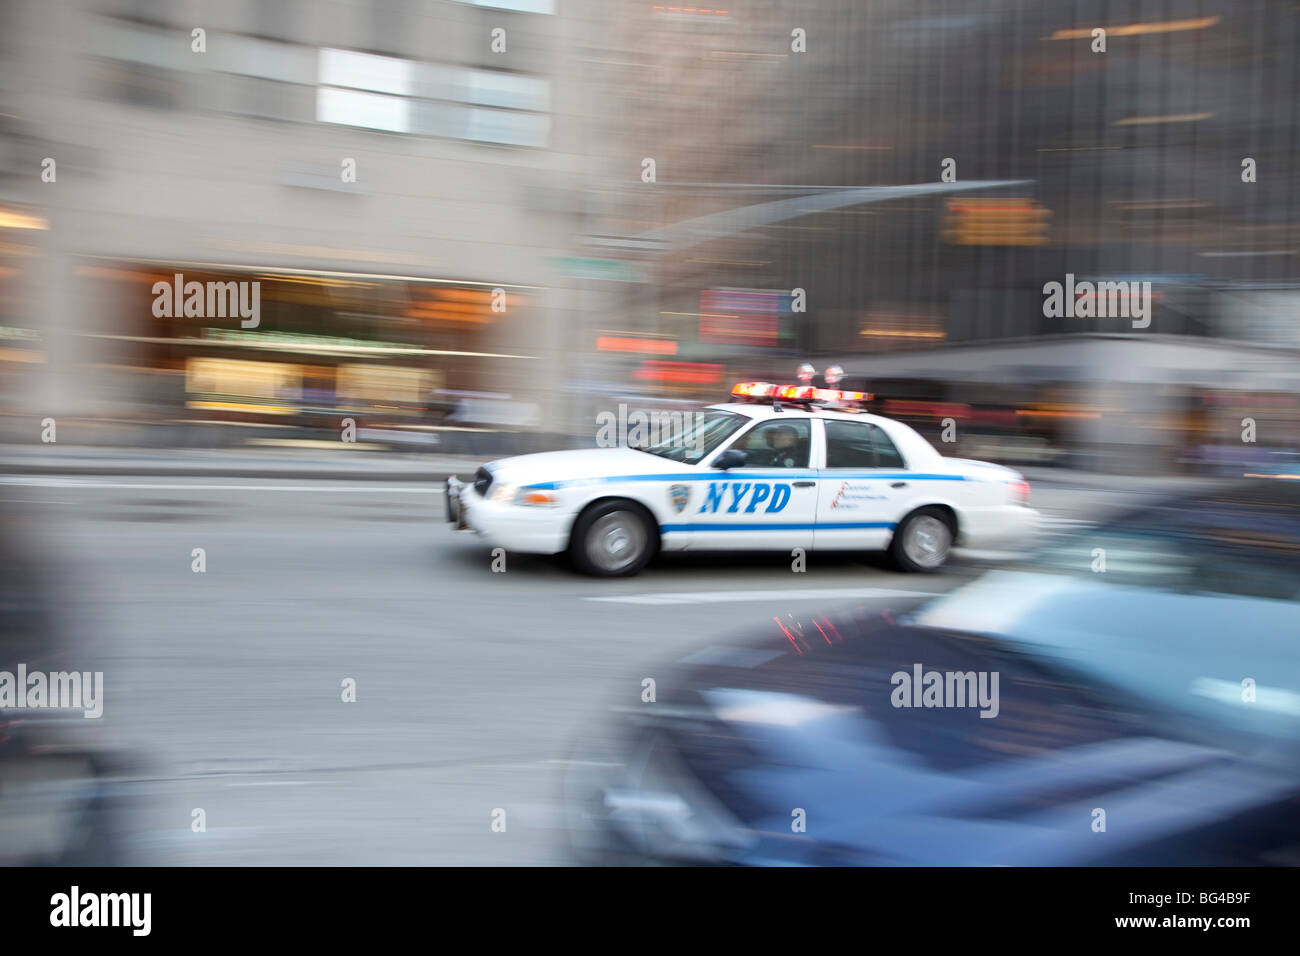 Voiture de police NYPD, Manhattan, New York City, USA Banque D'Images